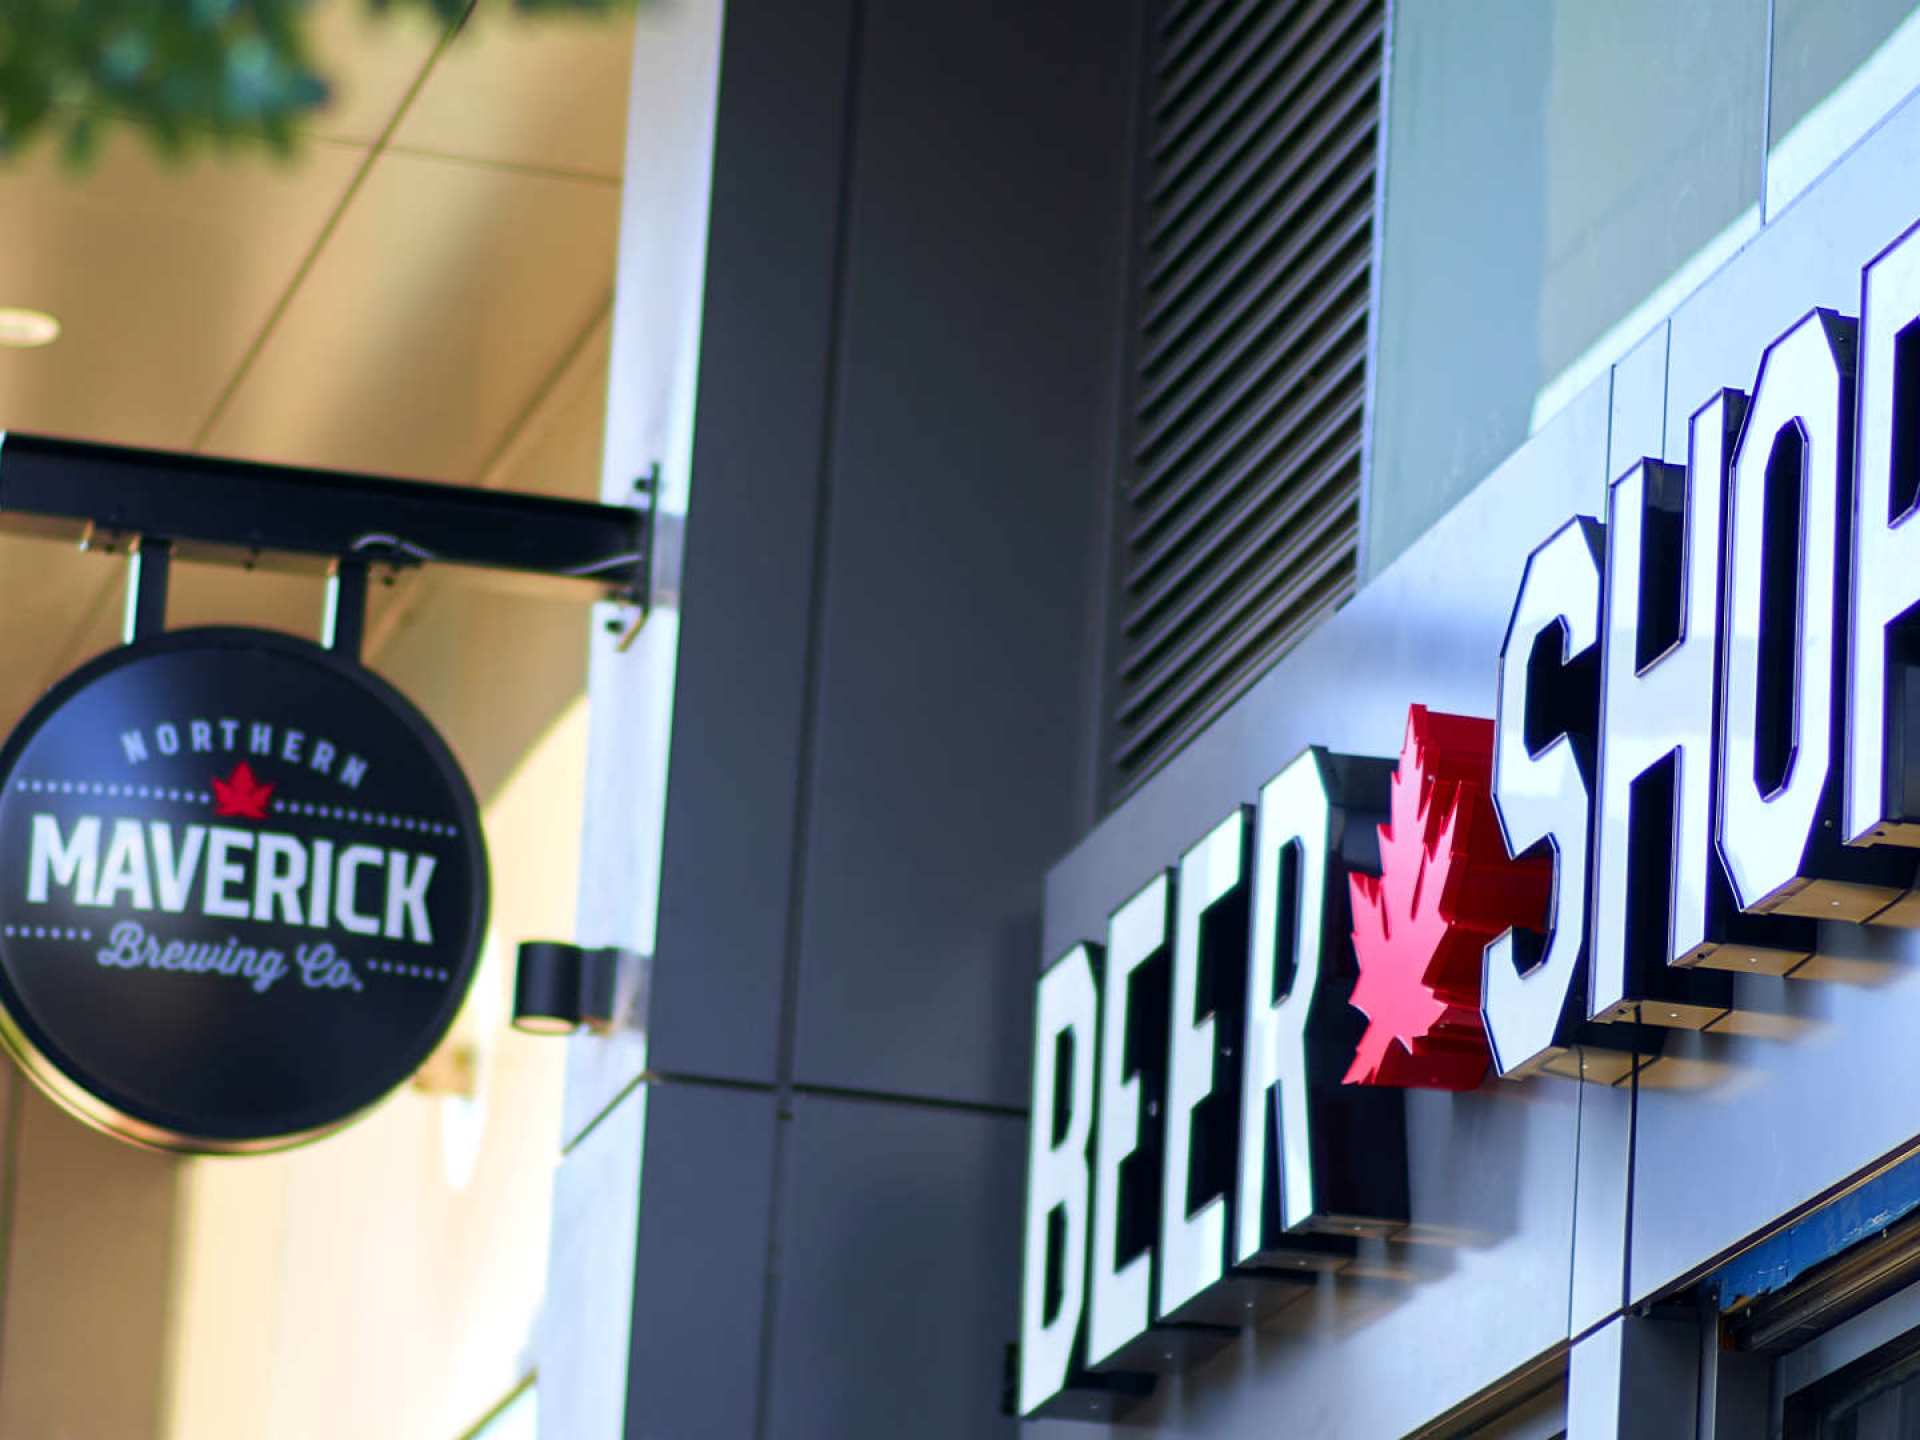 Best breweries in Toronto | The sign for Northern Maverick Brewing